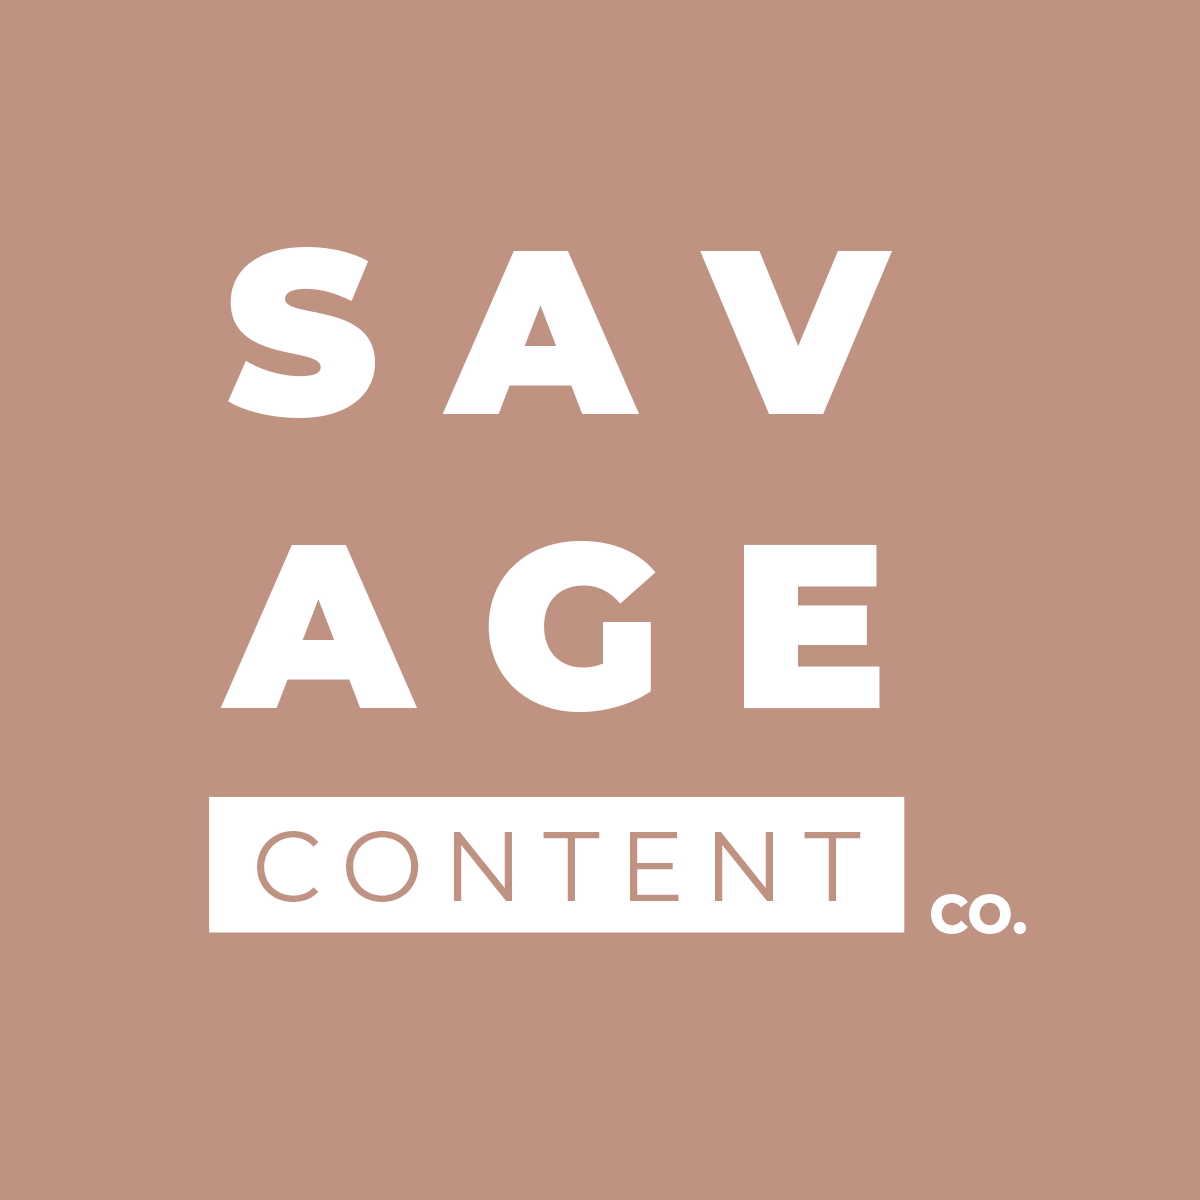 Savage Content Collective | Content Marketing to Build Your Brand